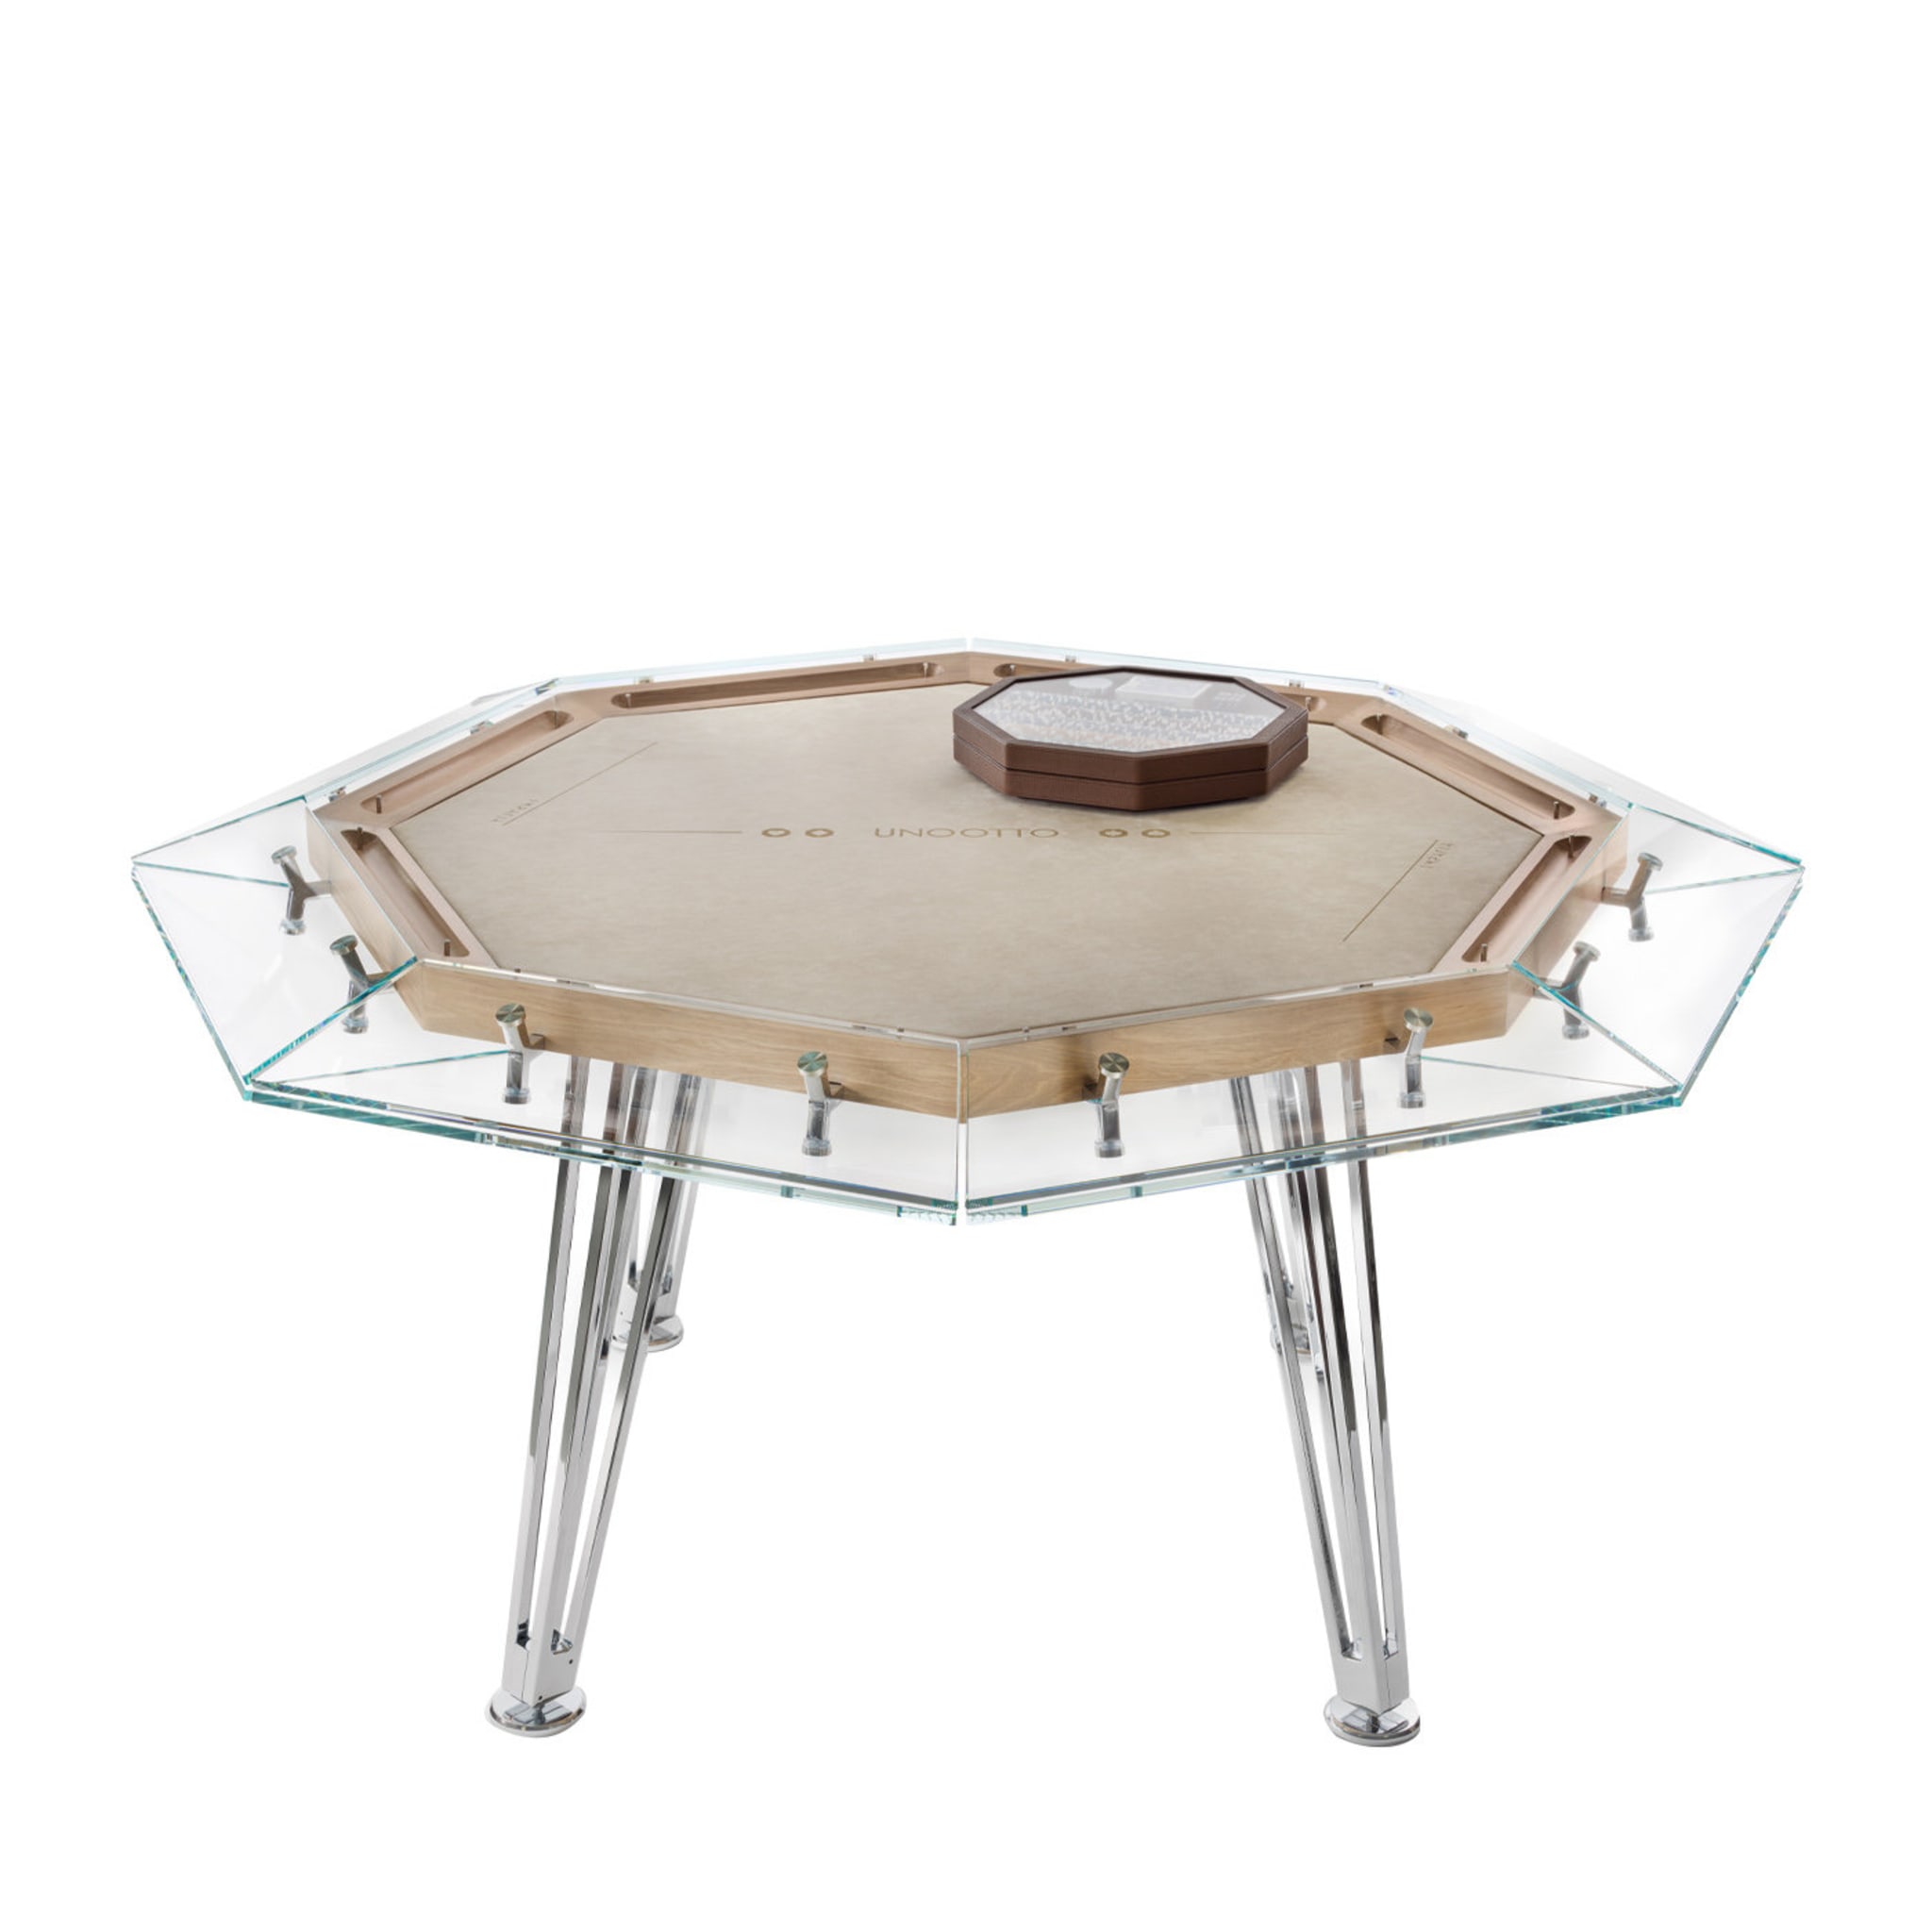 Unootto 8 Player Wood Edition Poker Table - Main view